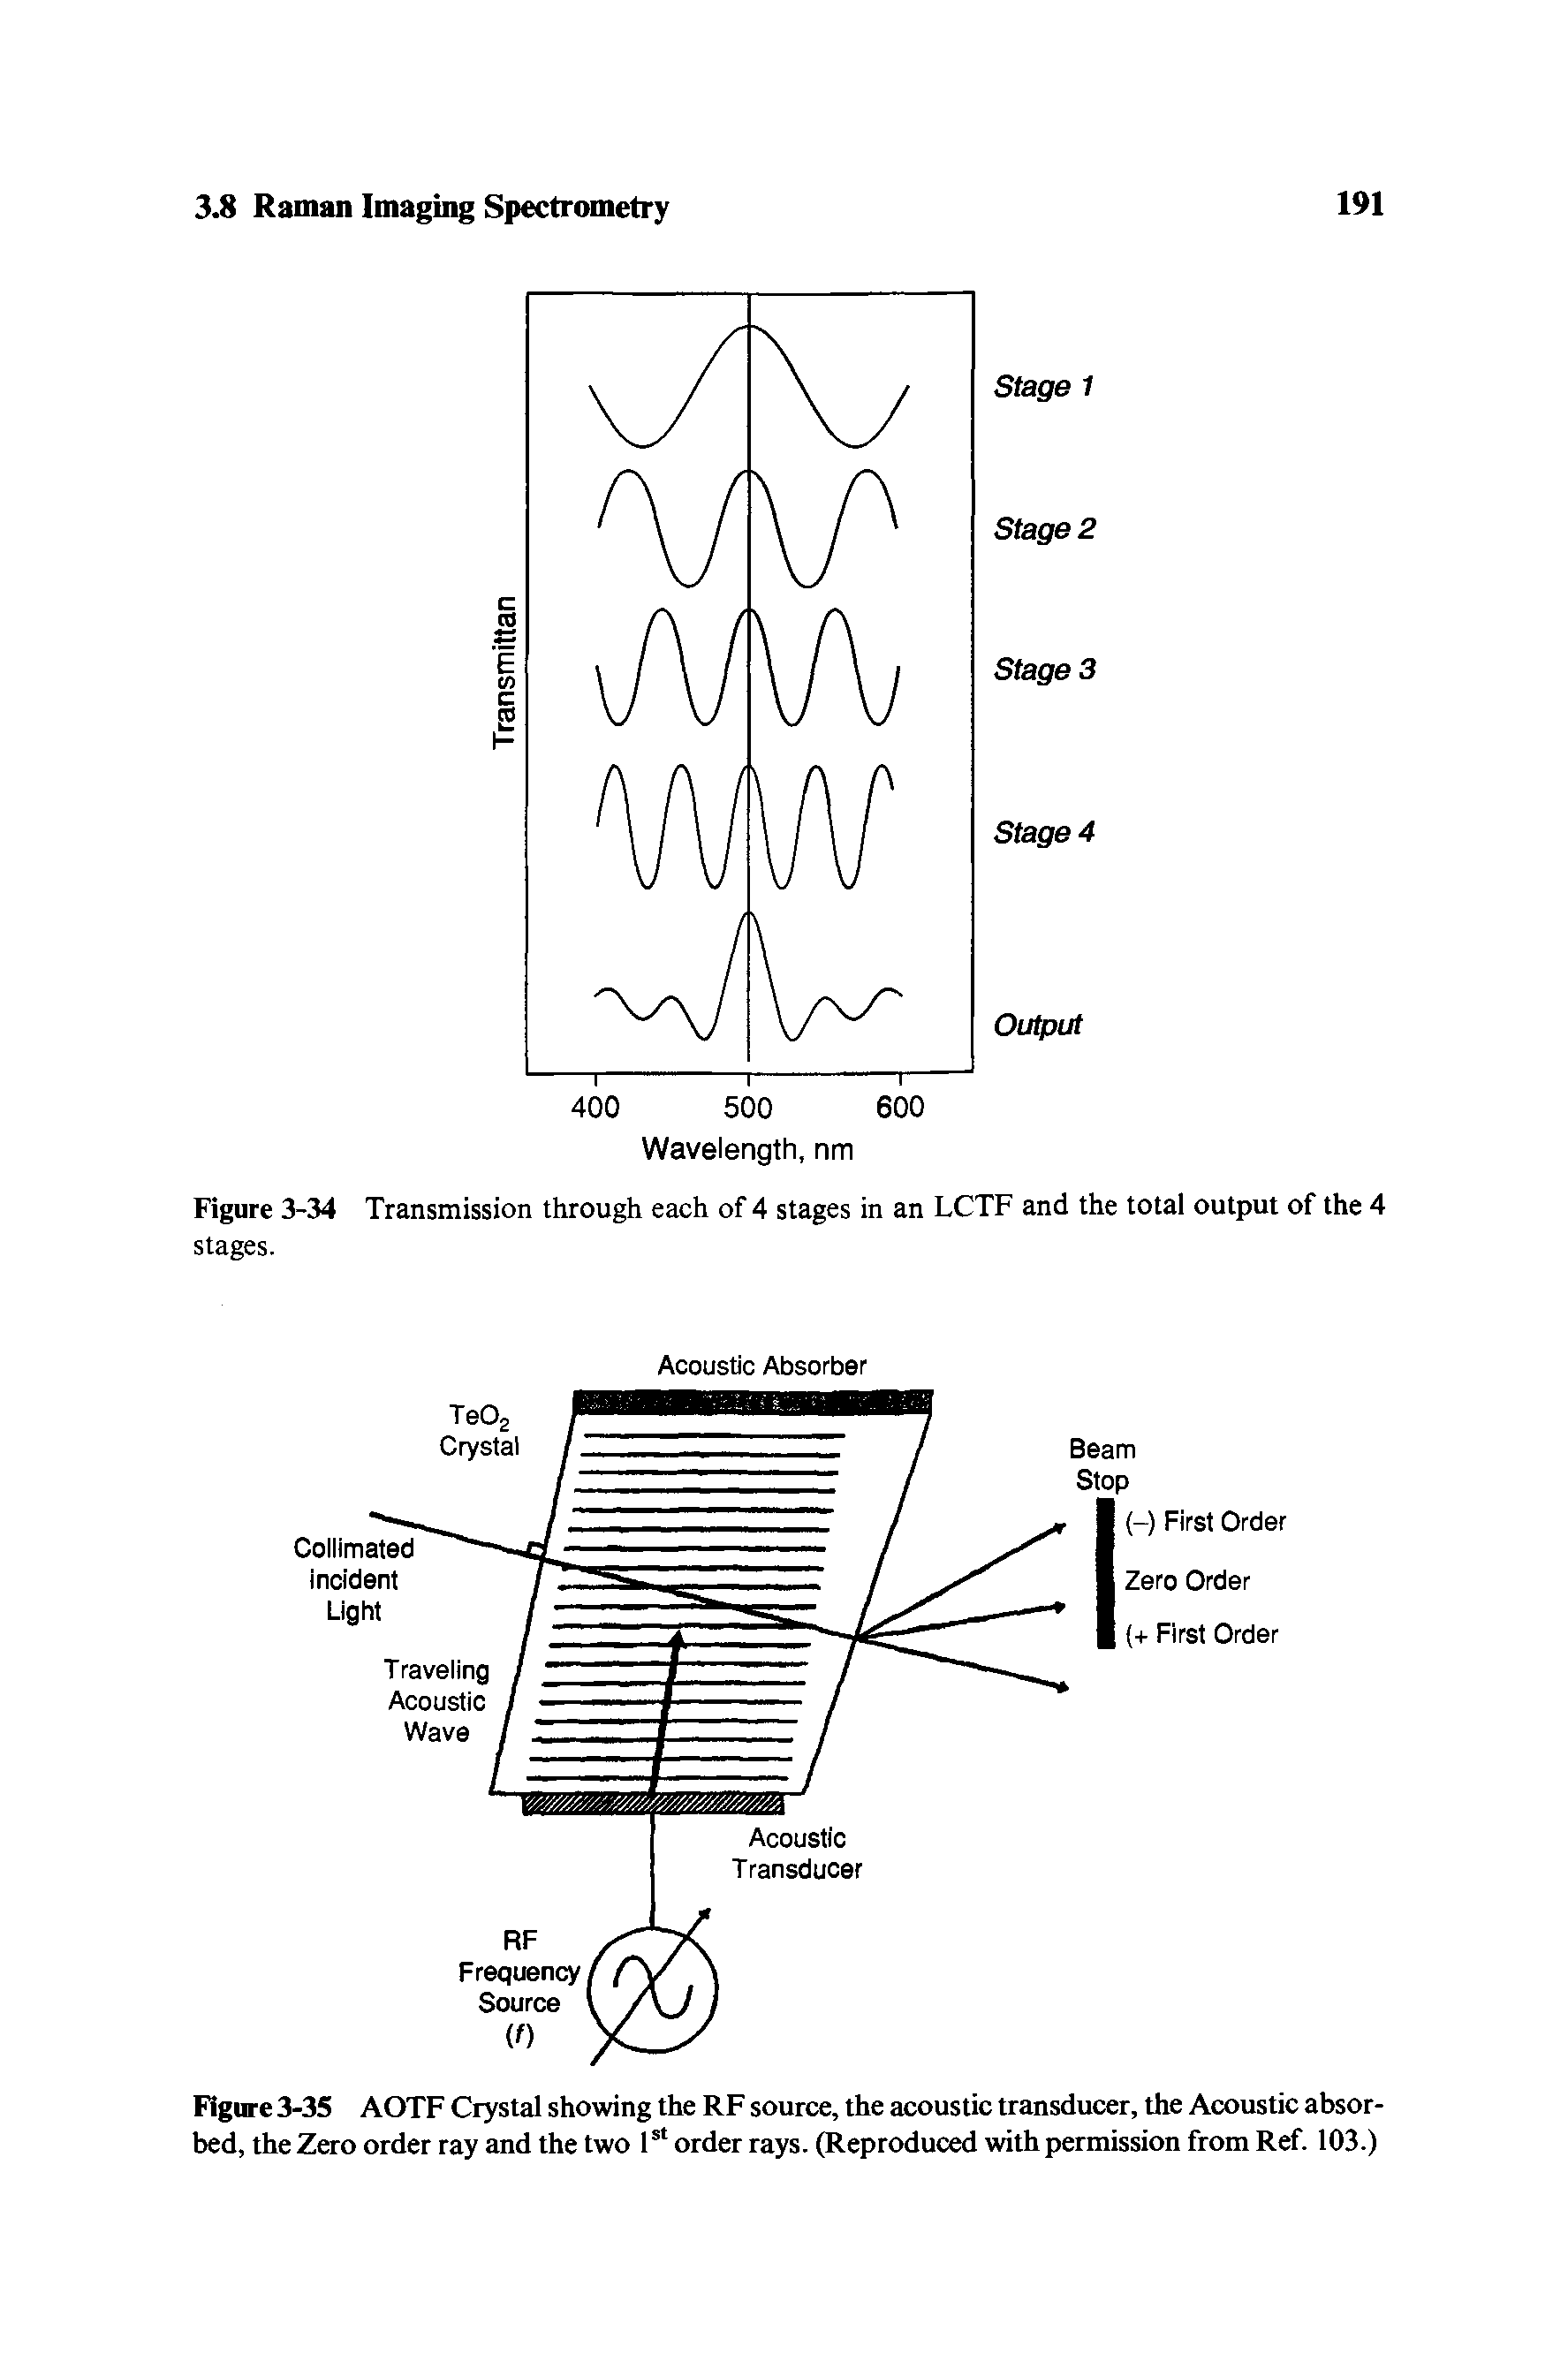 Figure 3-35 AOTF Crystal showing the RF source, the acoustic transducer, the Acoustic absorbed, the Zero order ray and the two 1st order rays. (Reproduced with permission from Ref. 103.)...